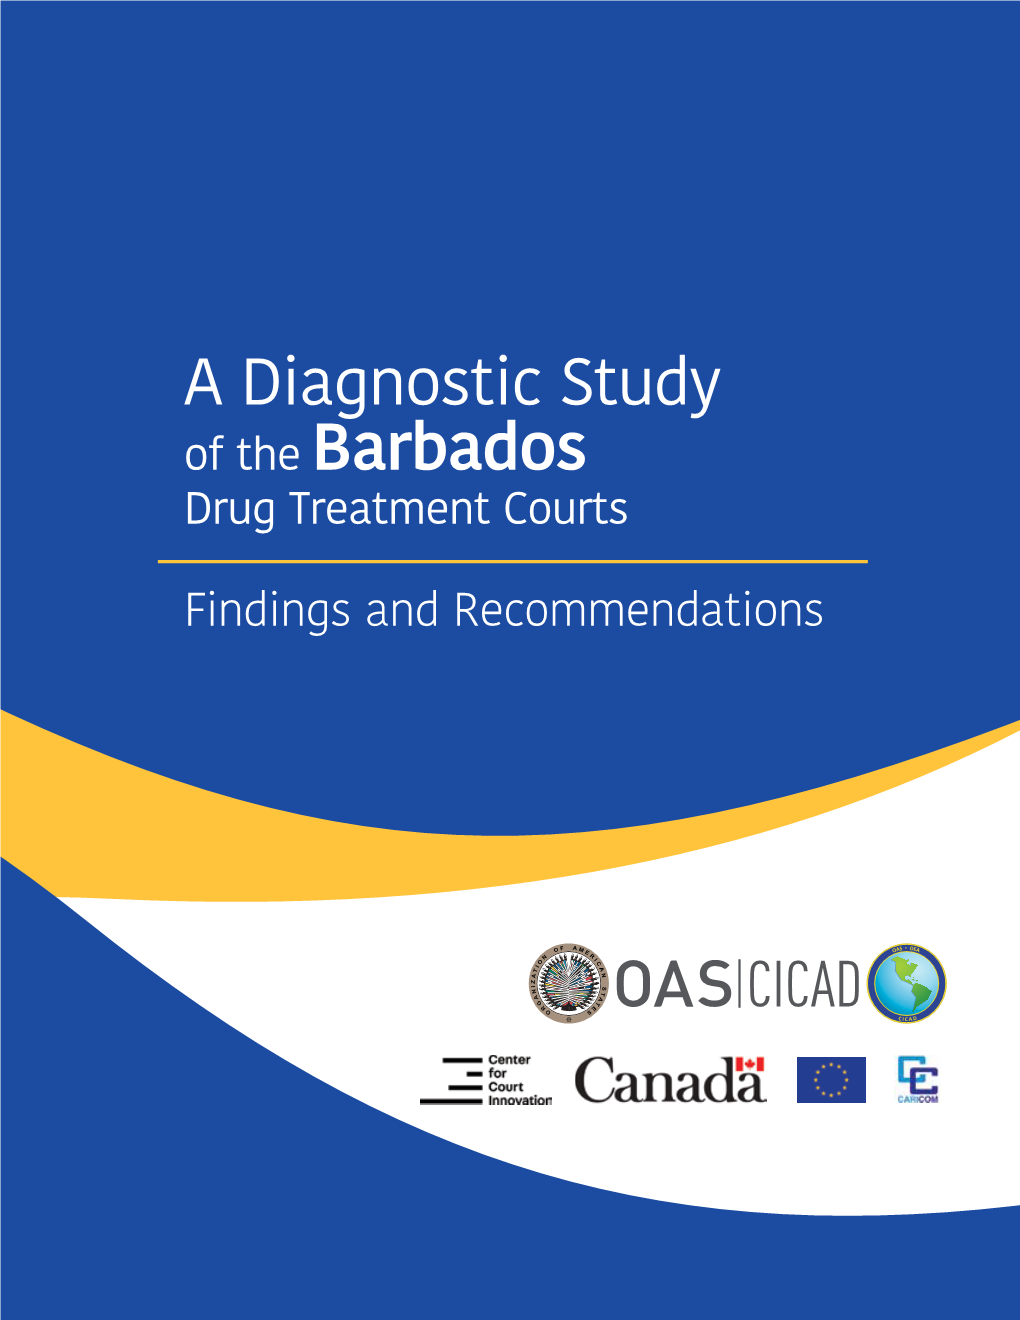 A Diagnostic Study of the Barbados Drug Treatment Courts